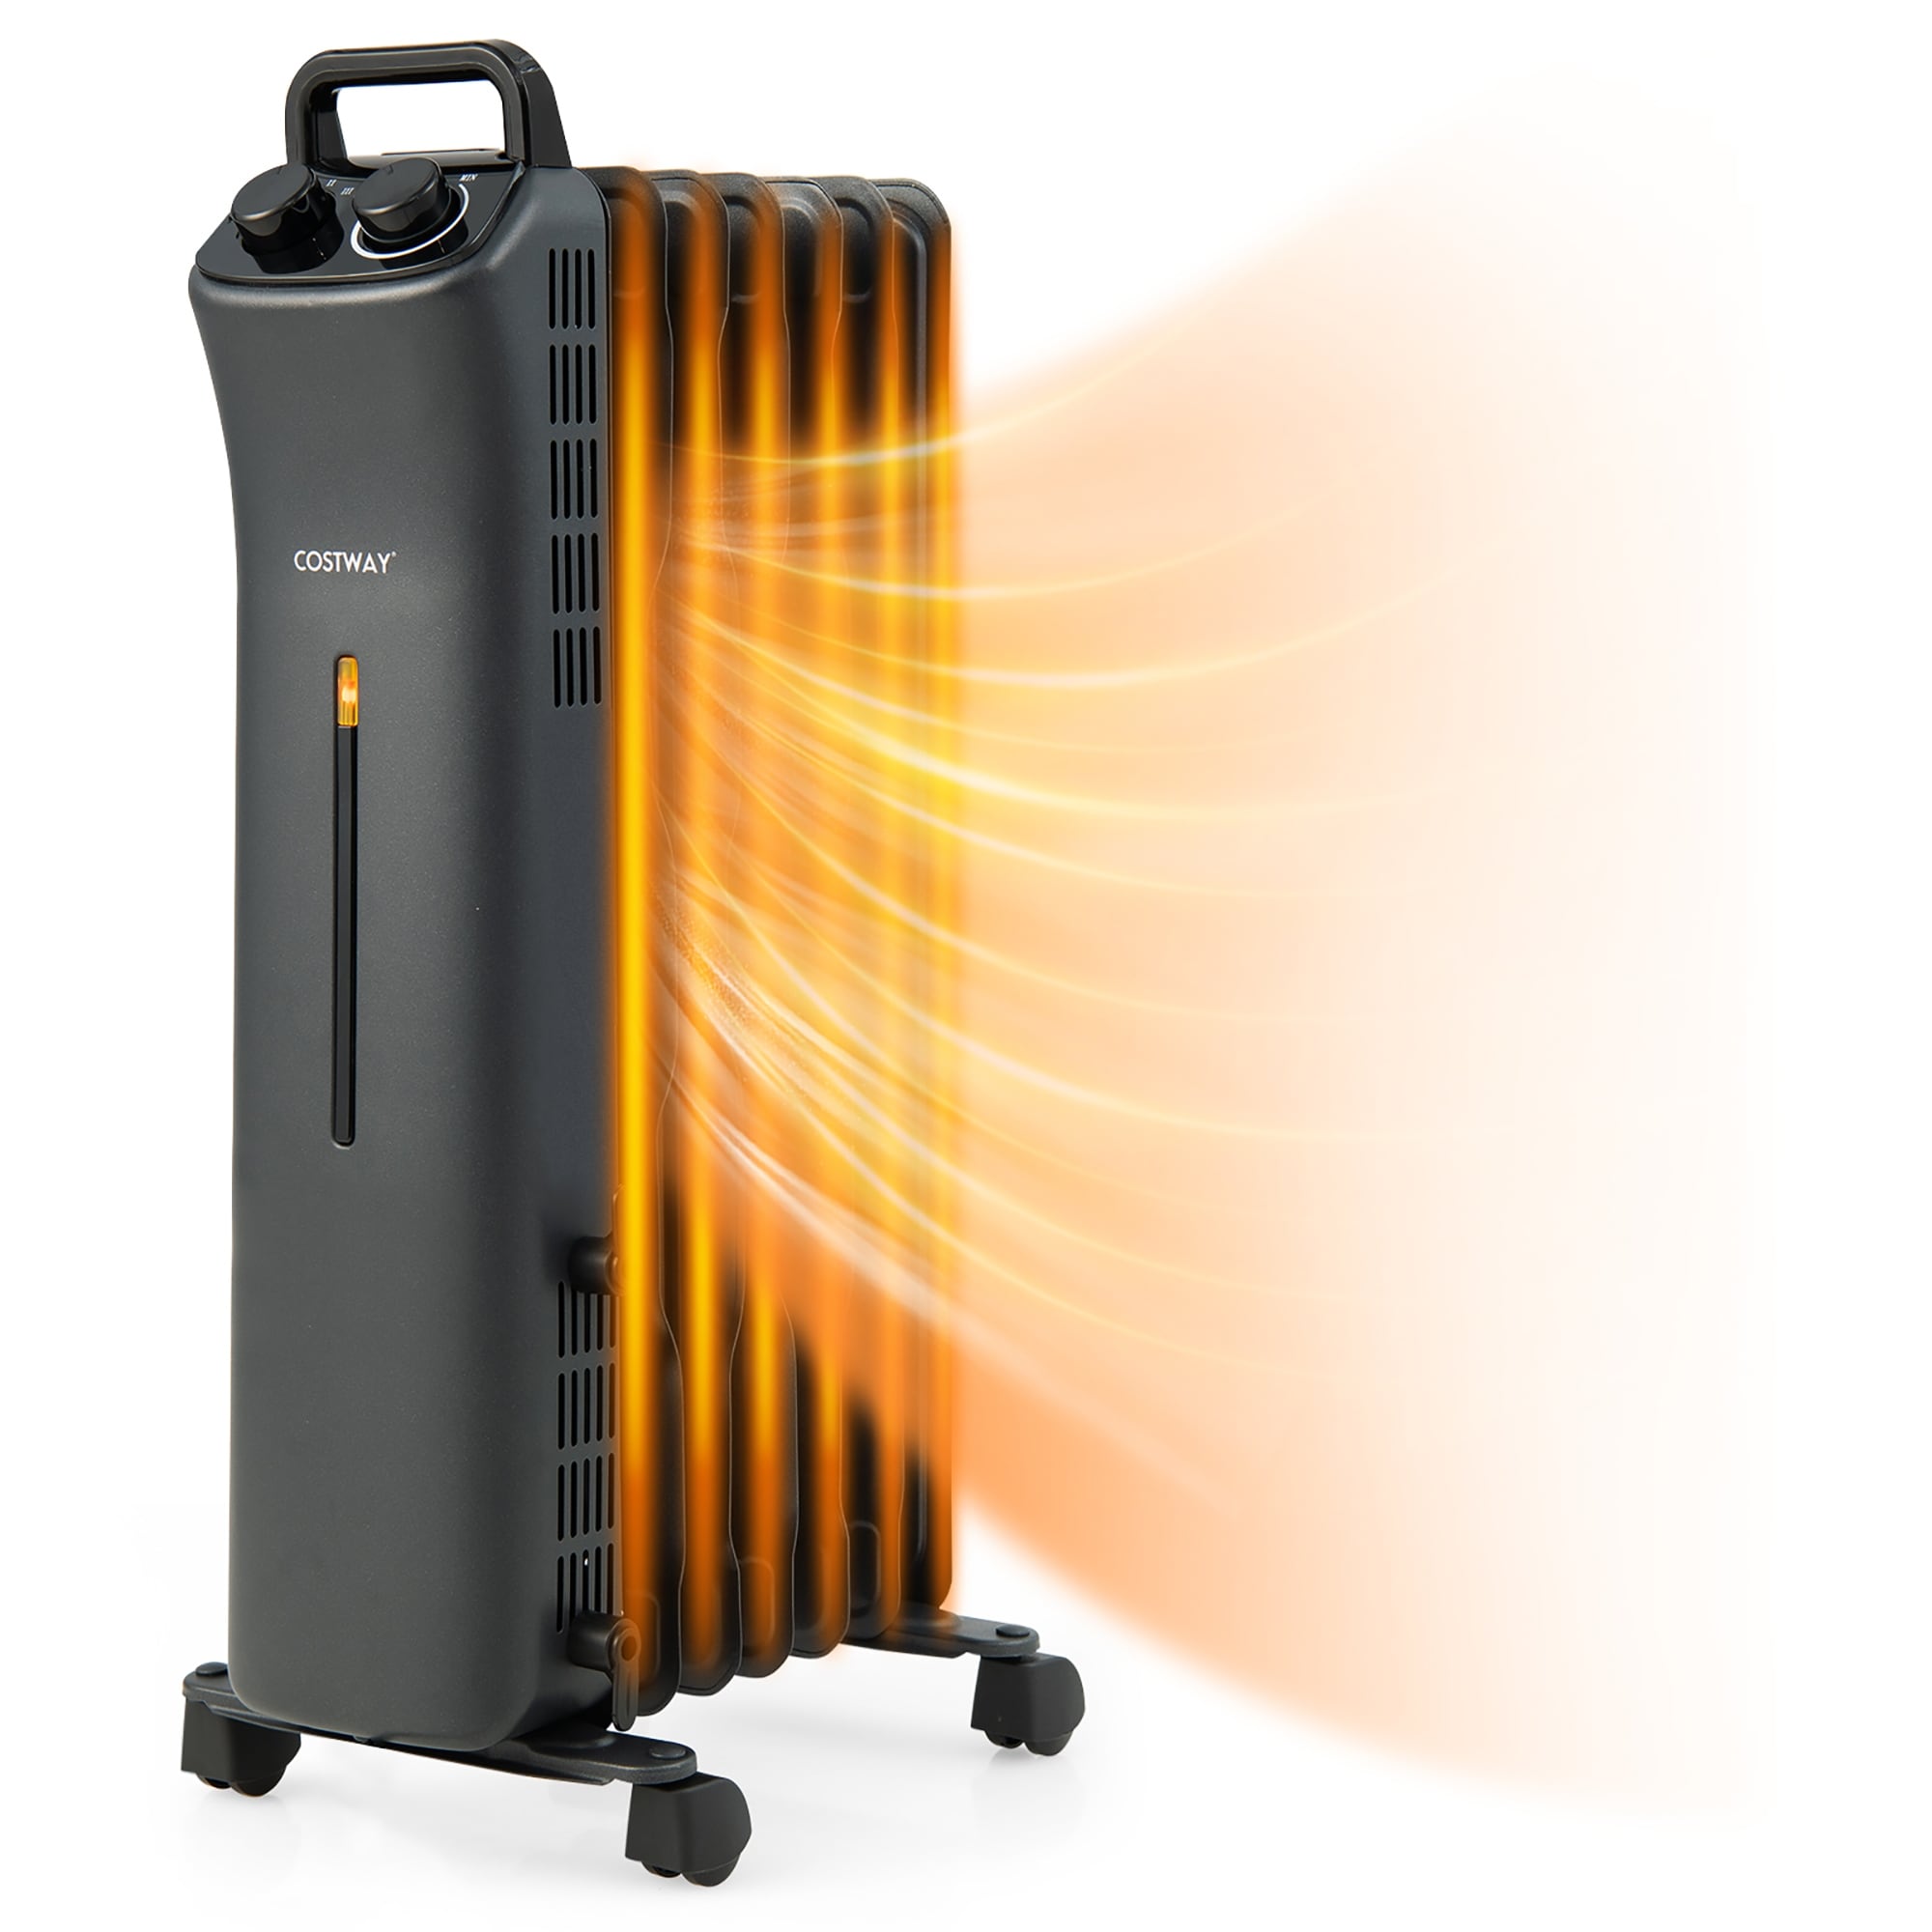 https://ak1.ostkcdn.com/images/products/is/images/direct/40e5ad2b3c7bd23fdc7dfcbc77389b2ebfb899b1/Costway-1500W-Oil-Filled-Space-Heater-Electric-Heater-w-Adjustable.jpg